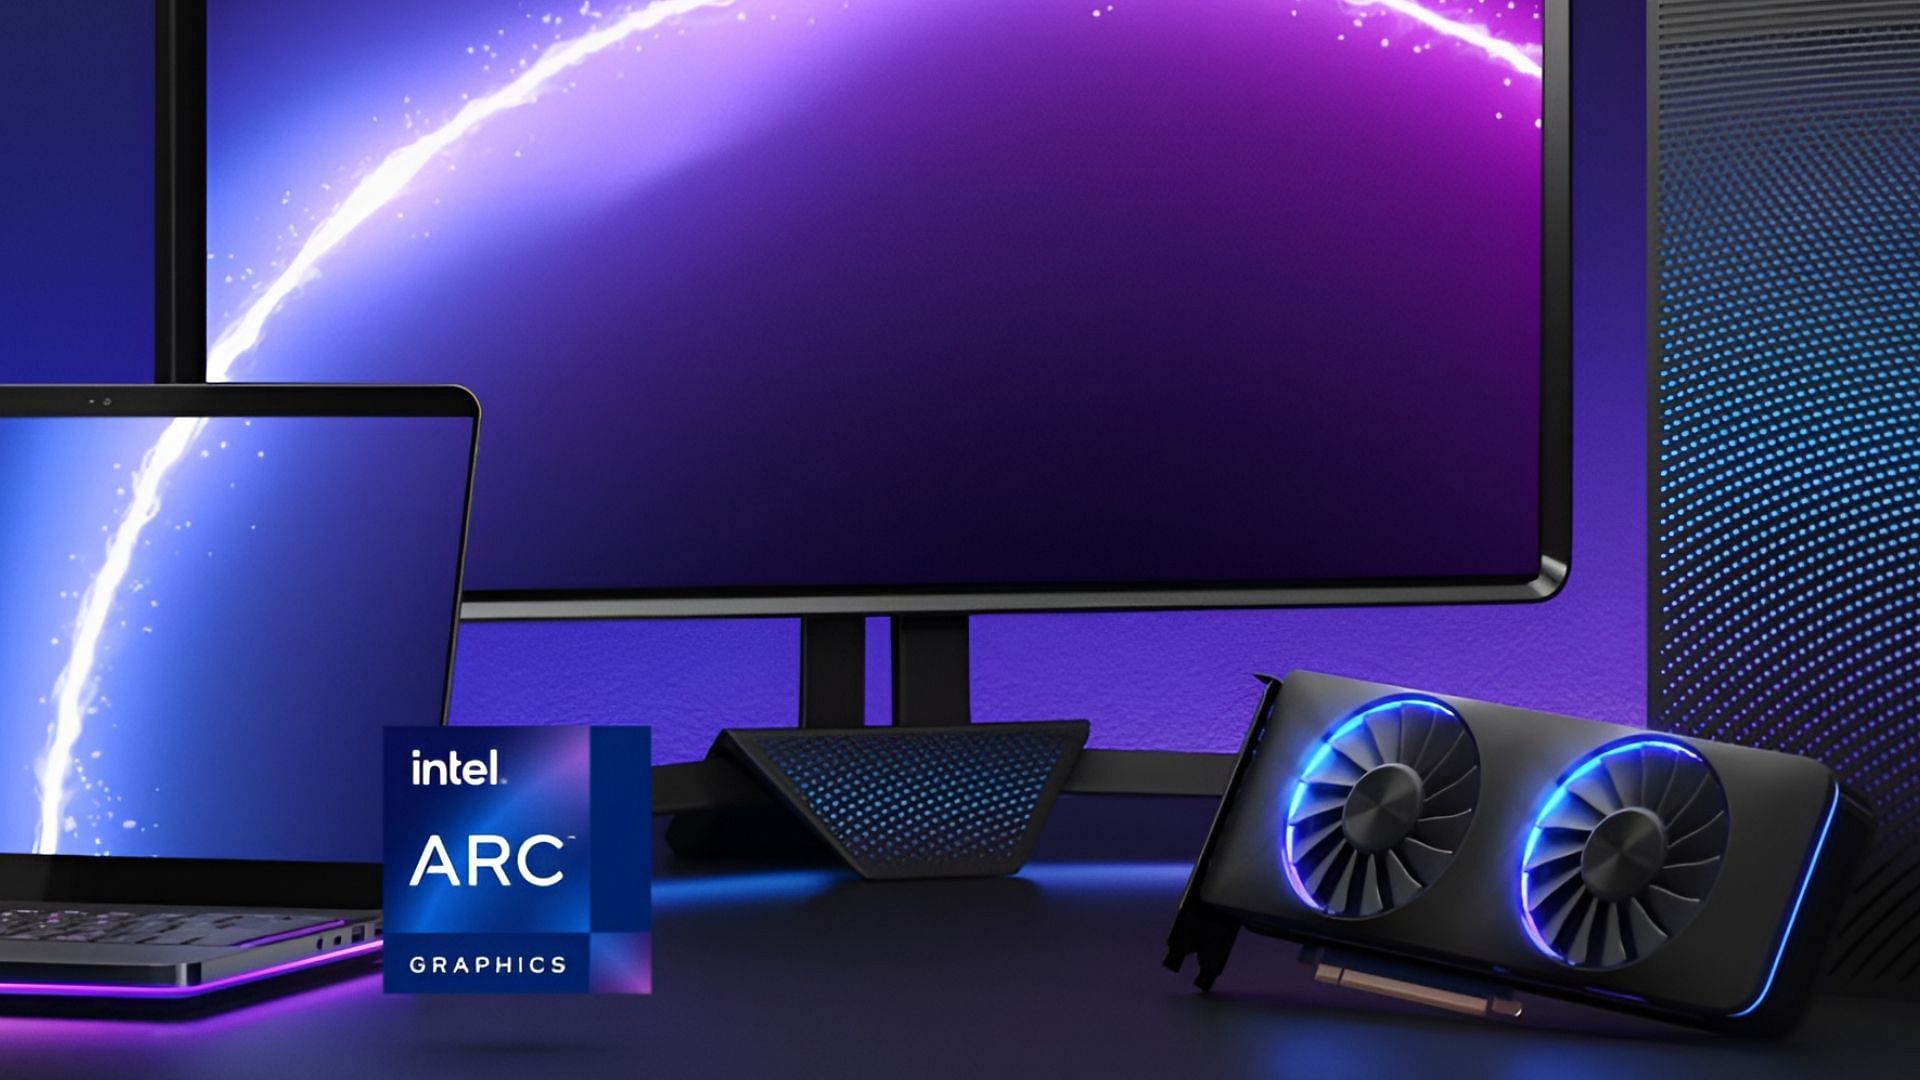 Intel ARC series GPUs are available for desktops and laptops (Image via Intel)